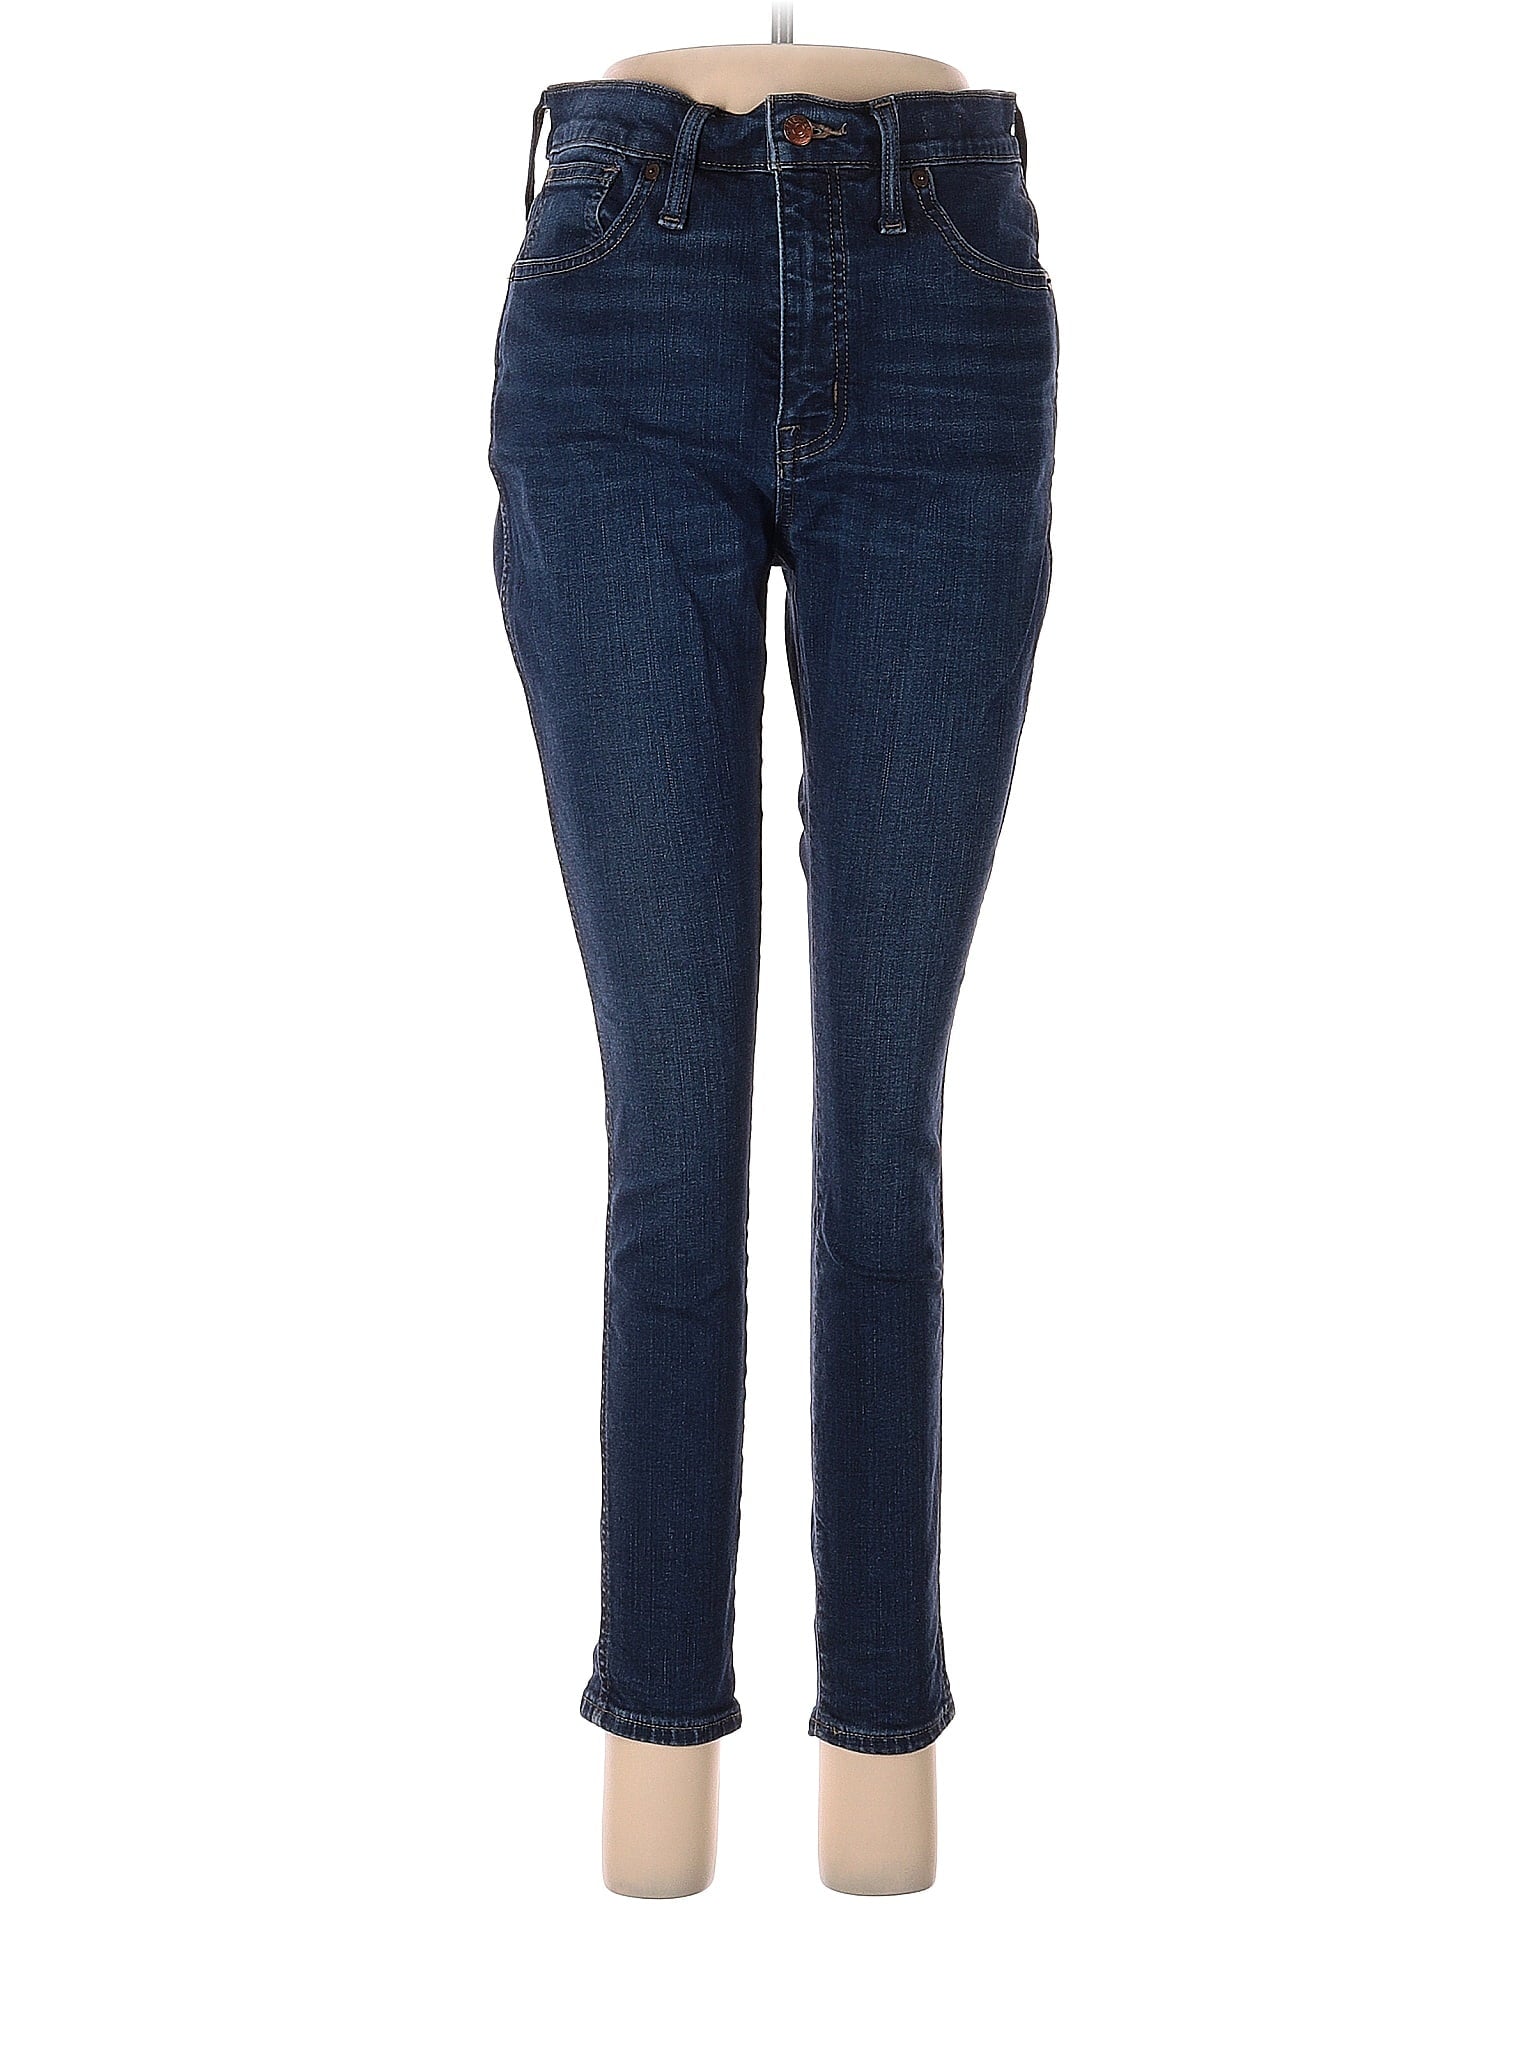 High-Rise Skinny Petite 10" High-Rise Skinny Jeans In Hayes Wash in Dark Wash waist size - 29 P